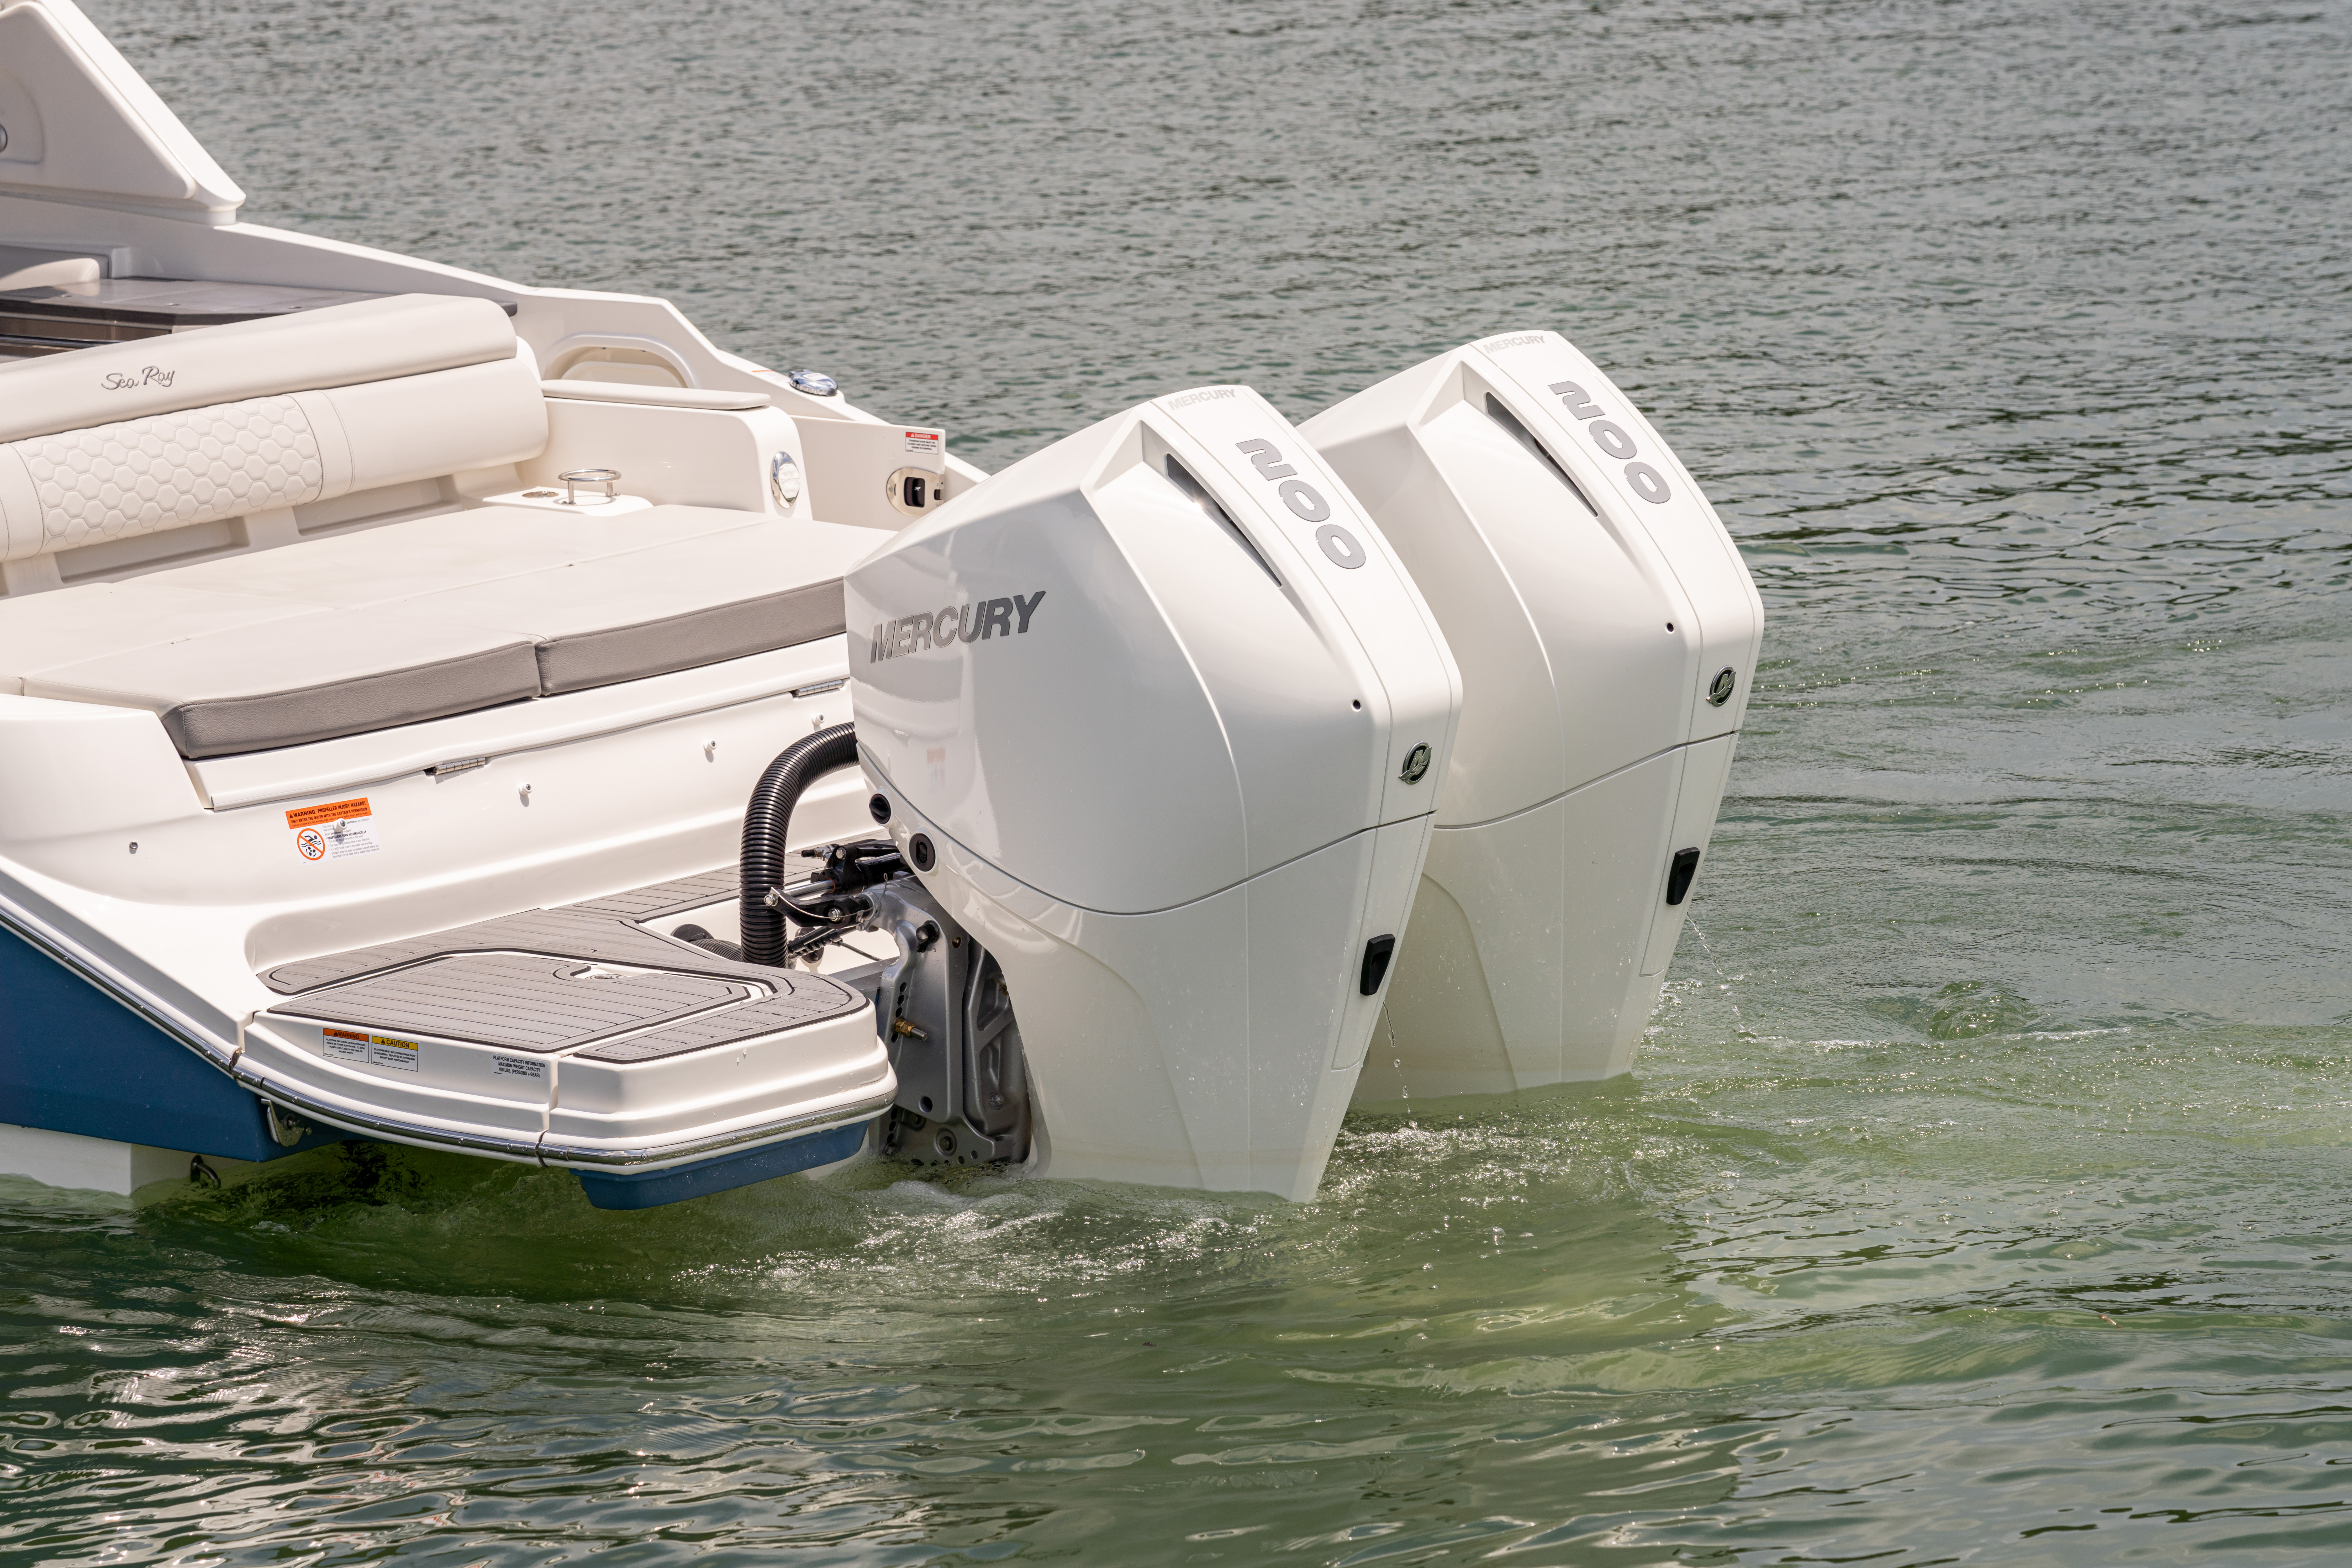 Boat Engines: Outboard Engine vs. Sterndrive